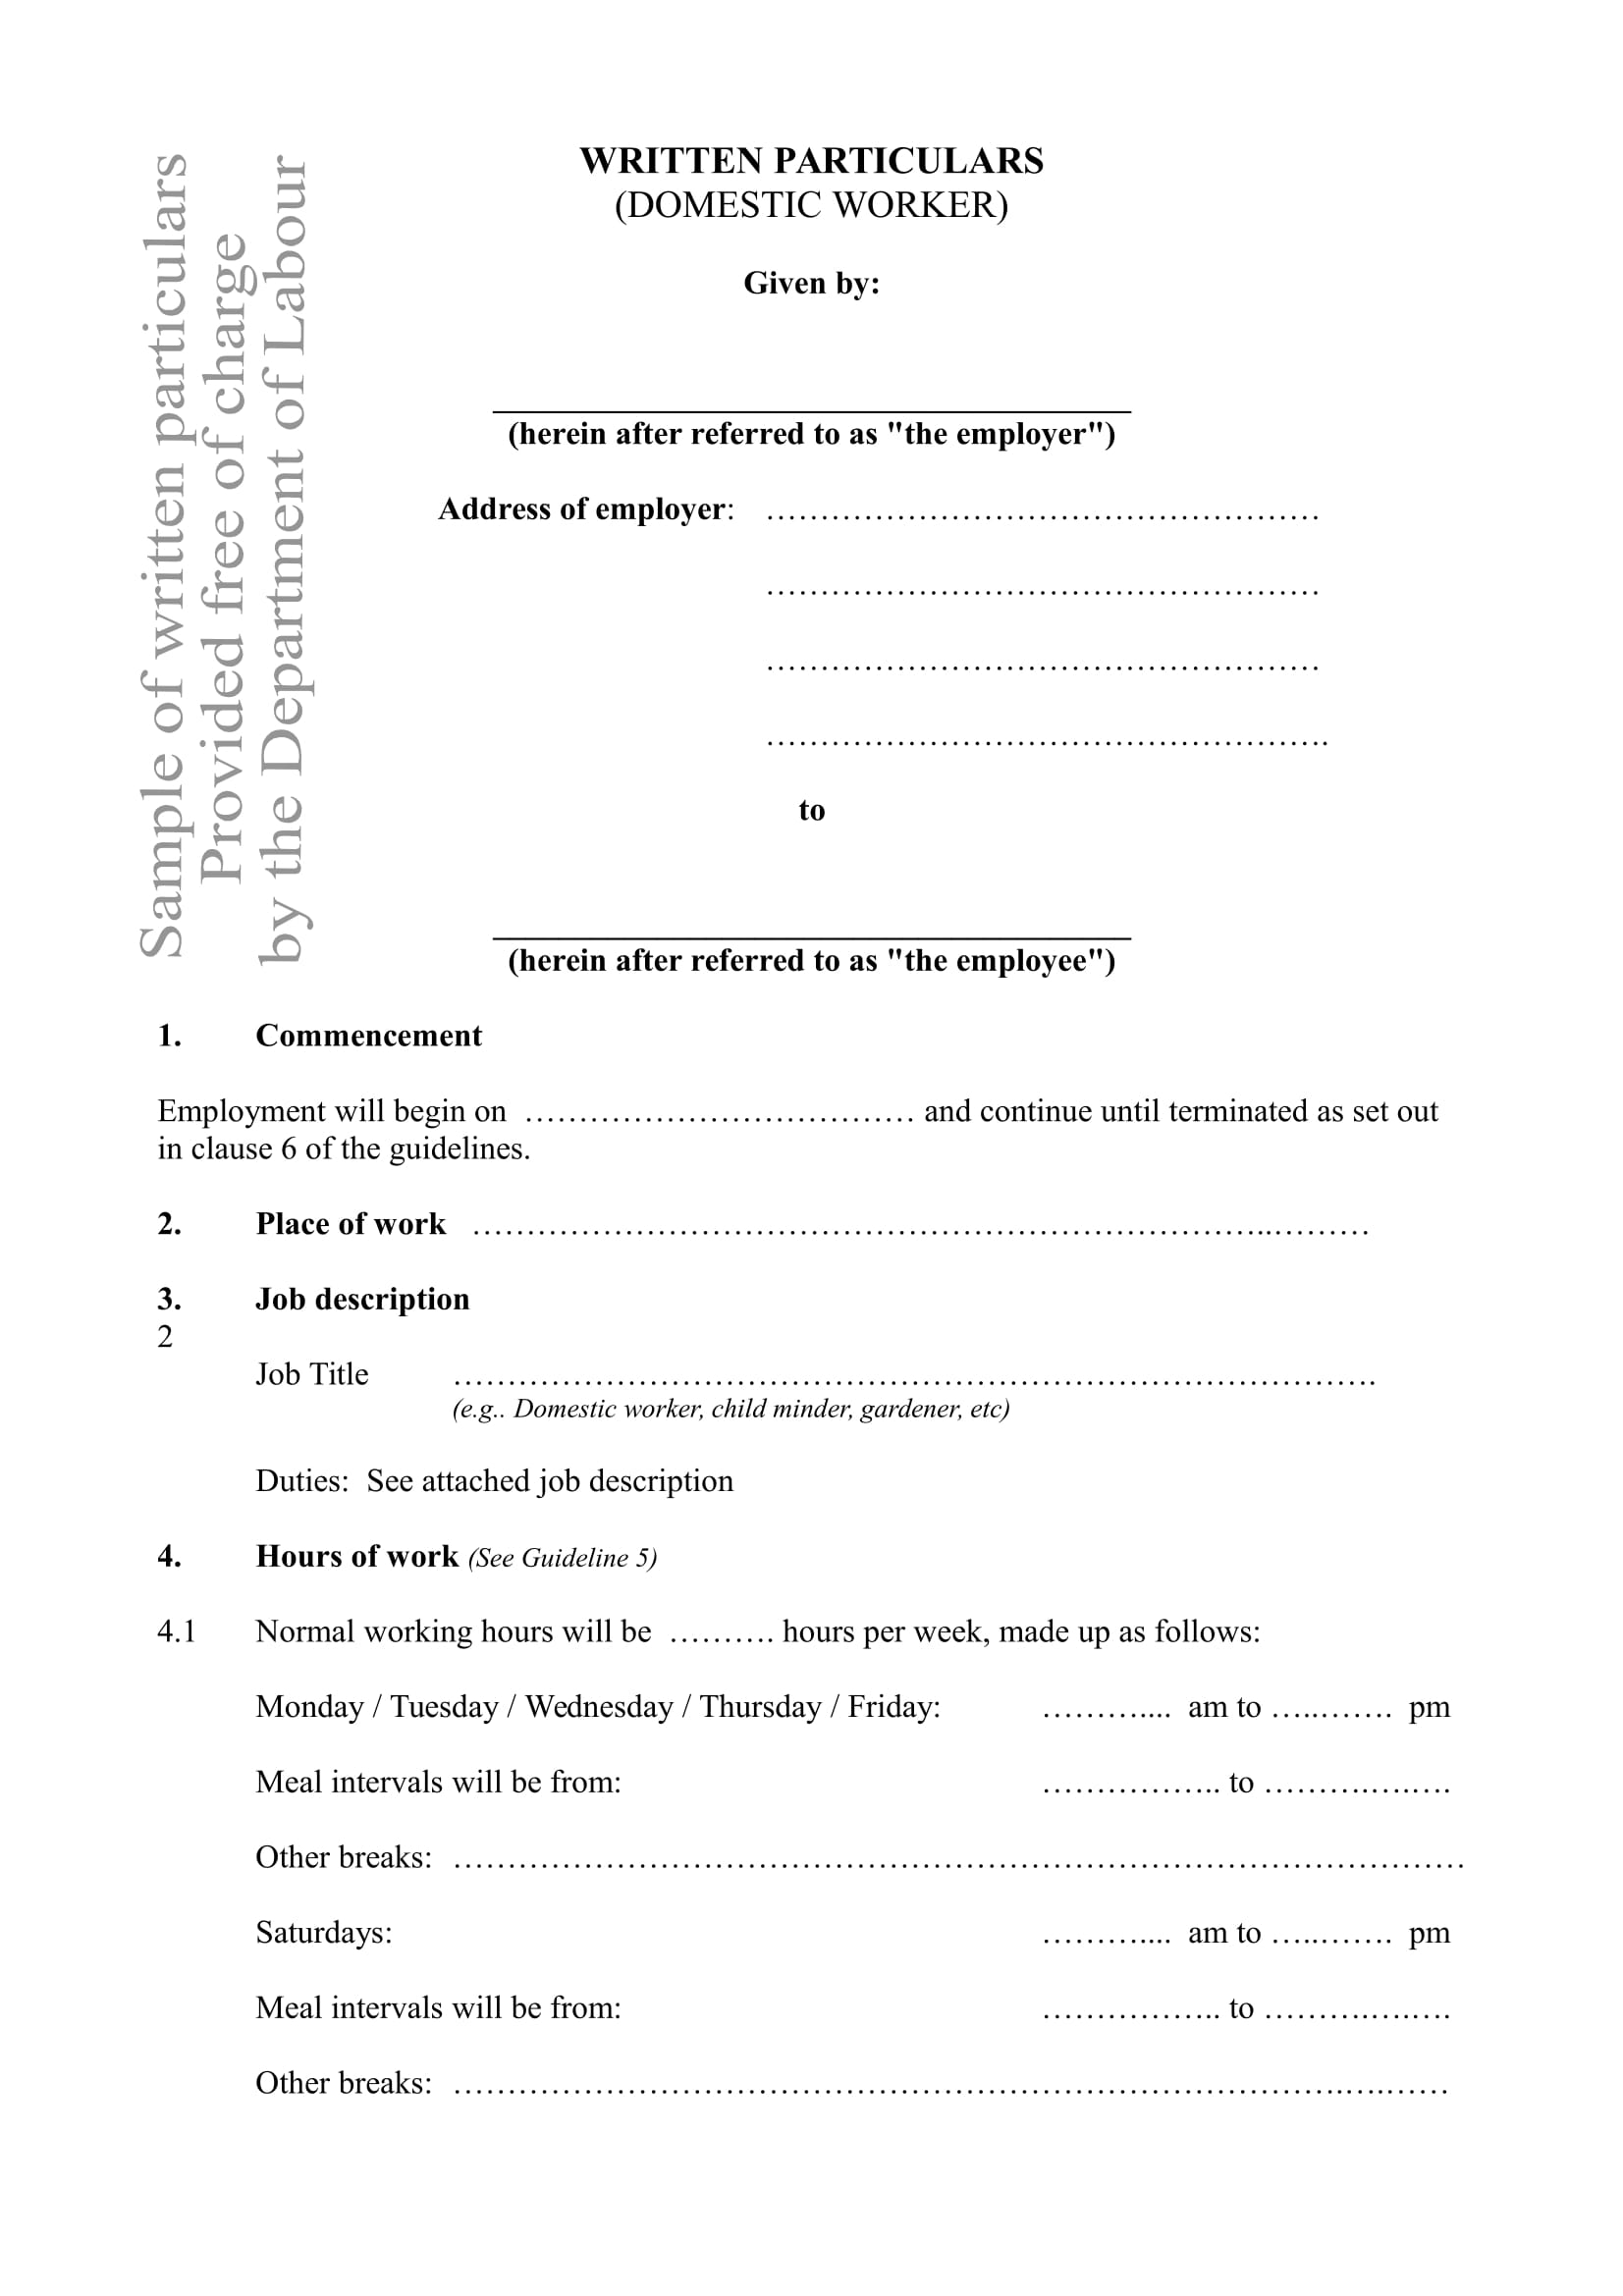 sample domestic worker employment contract 1